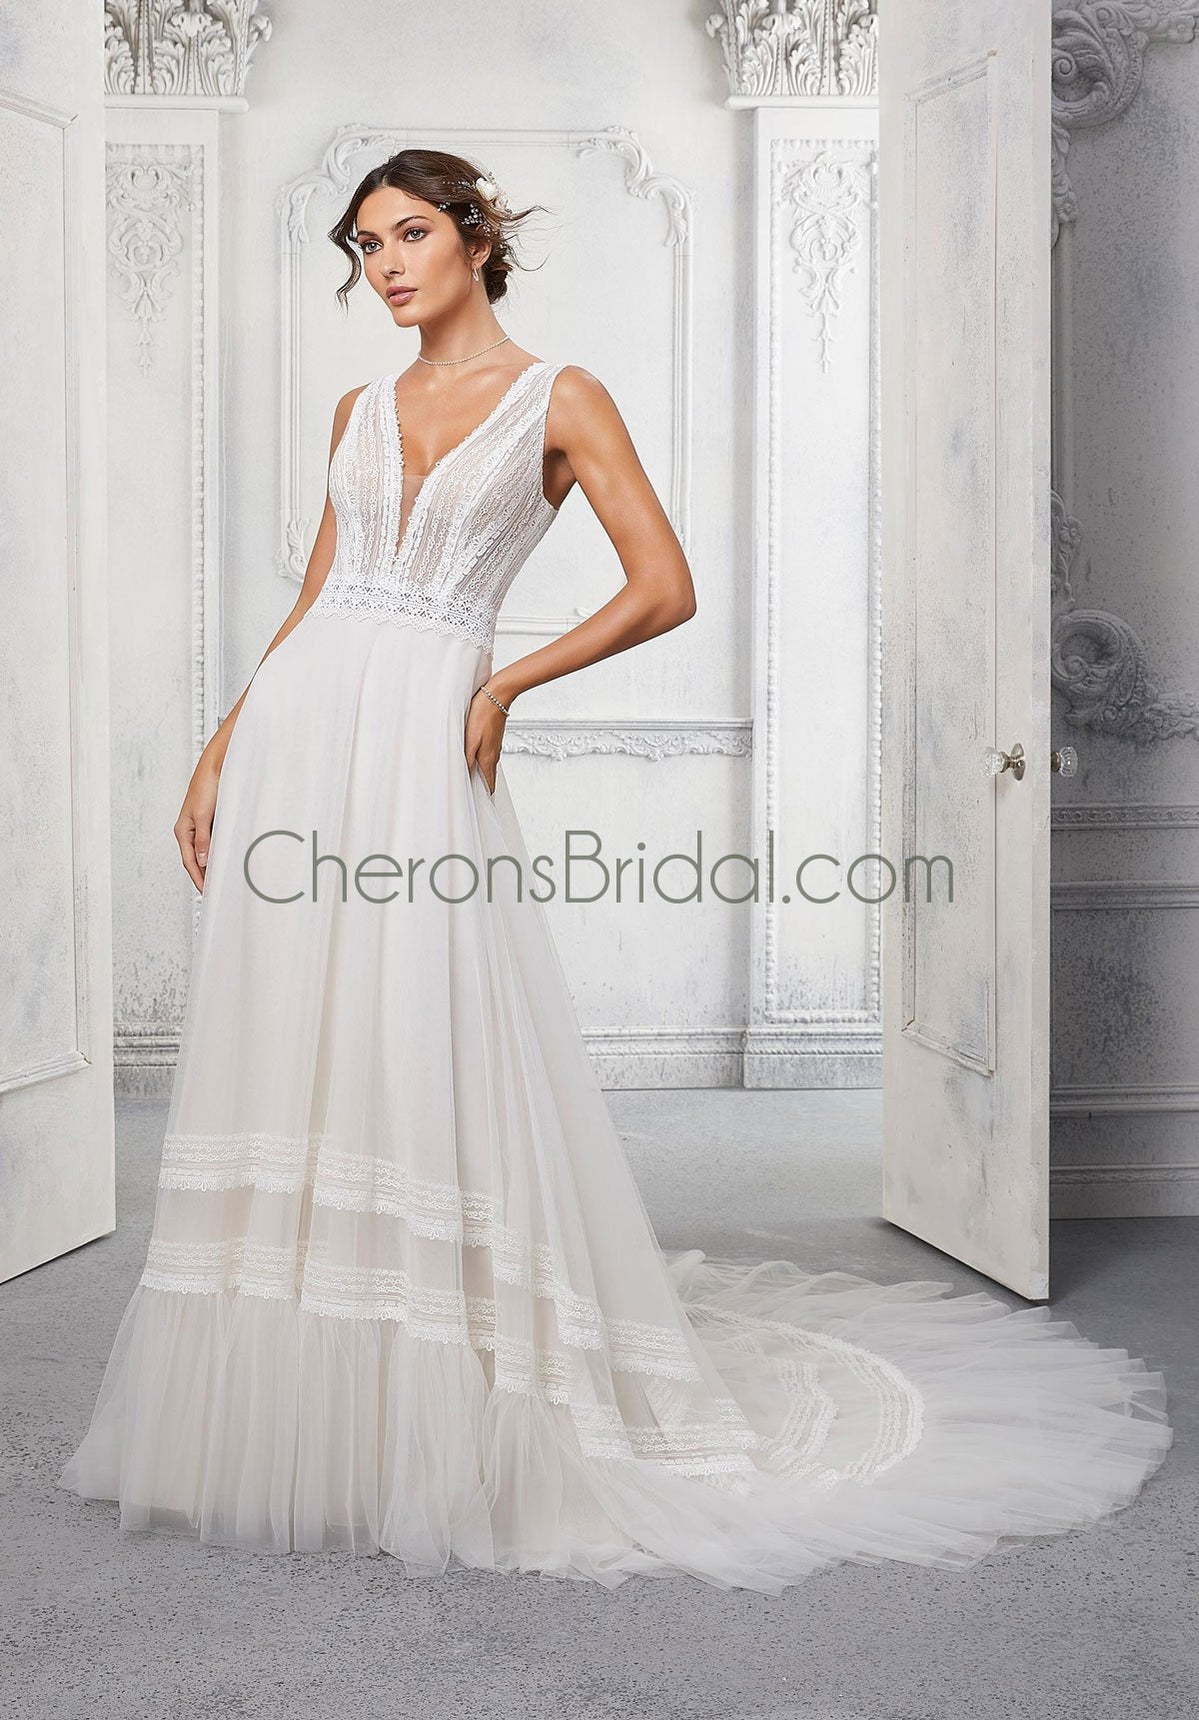 Blu - 5916 - Clara - Cheron's Bridal, Wedding Gown - Morilee Blu - - Wedding Gowns Dresses Chattanooga Hixson Shops Boutiques Tennessee TN Georgia GA MSRP Lowest Prices Sale Discount